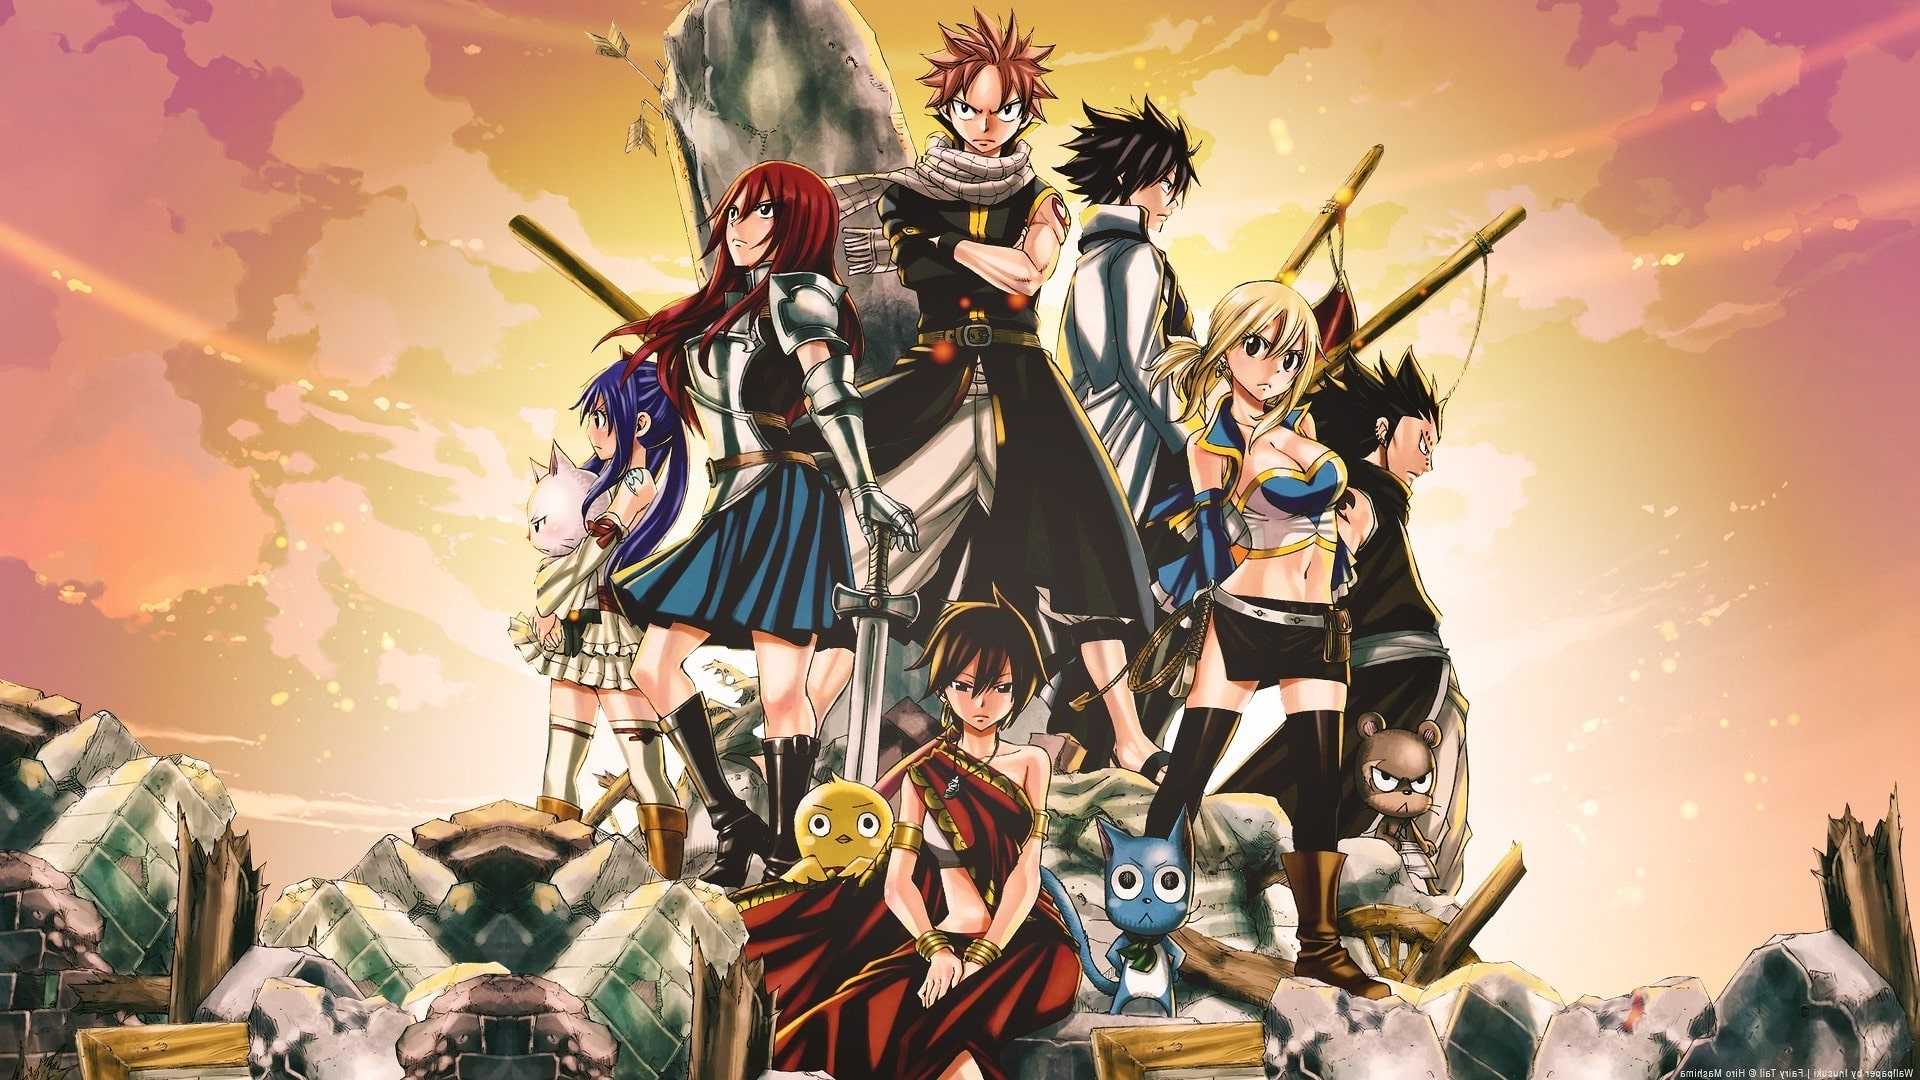 Fairy Tail Wallpaper - NawPic